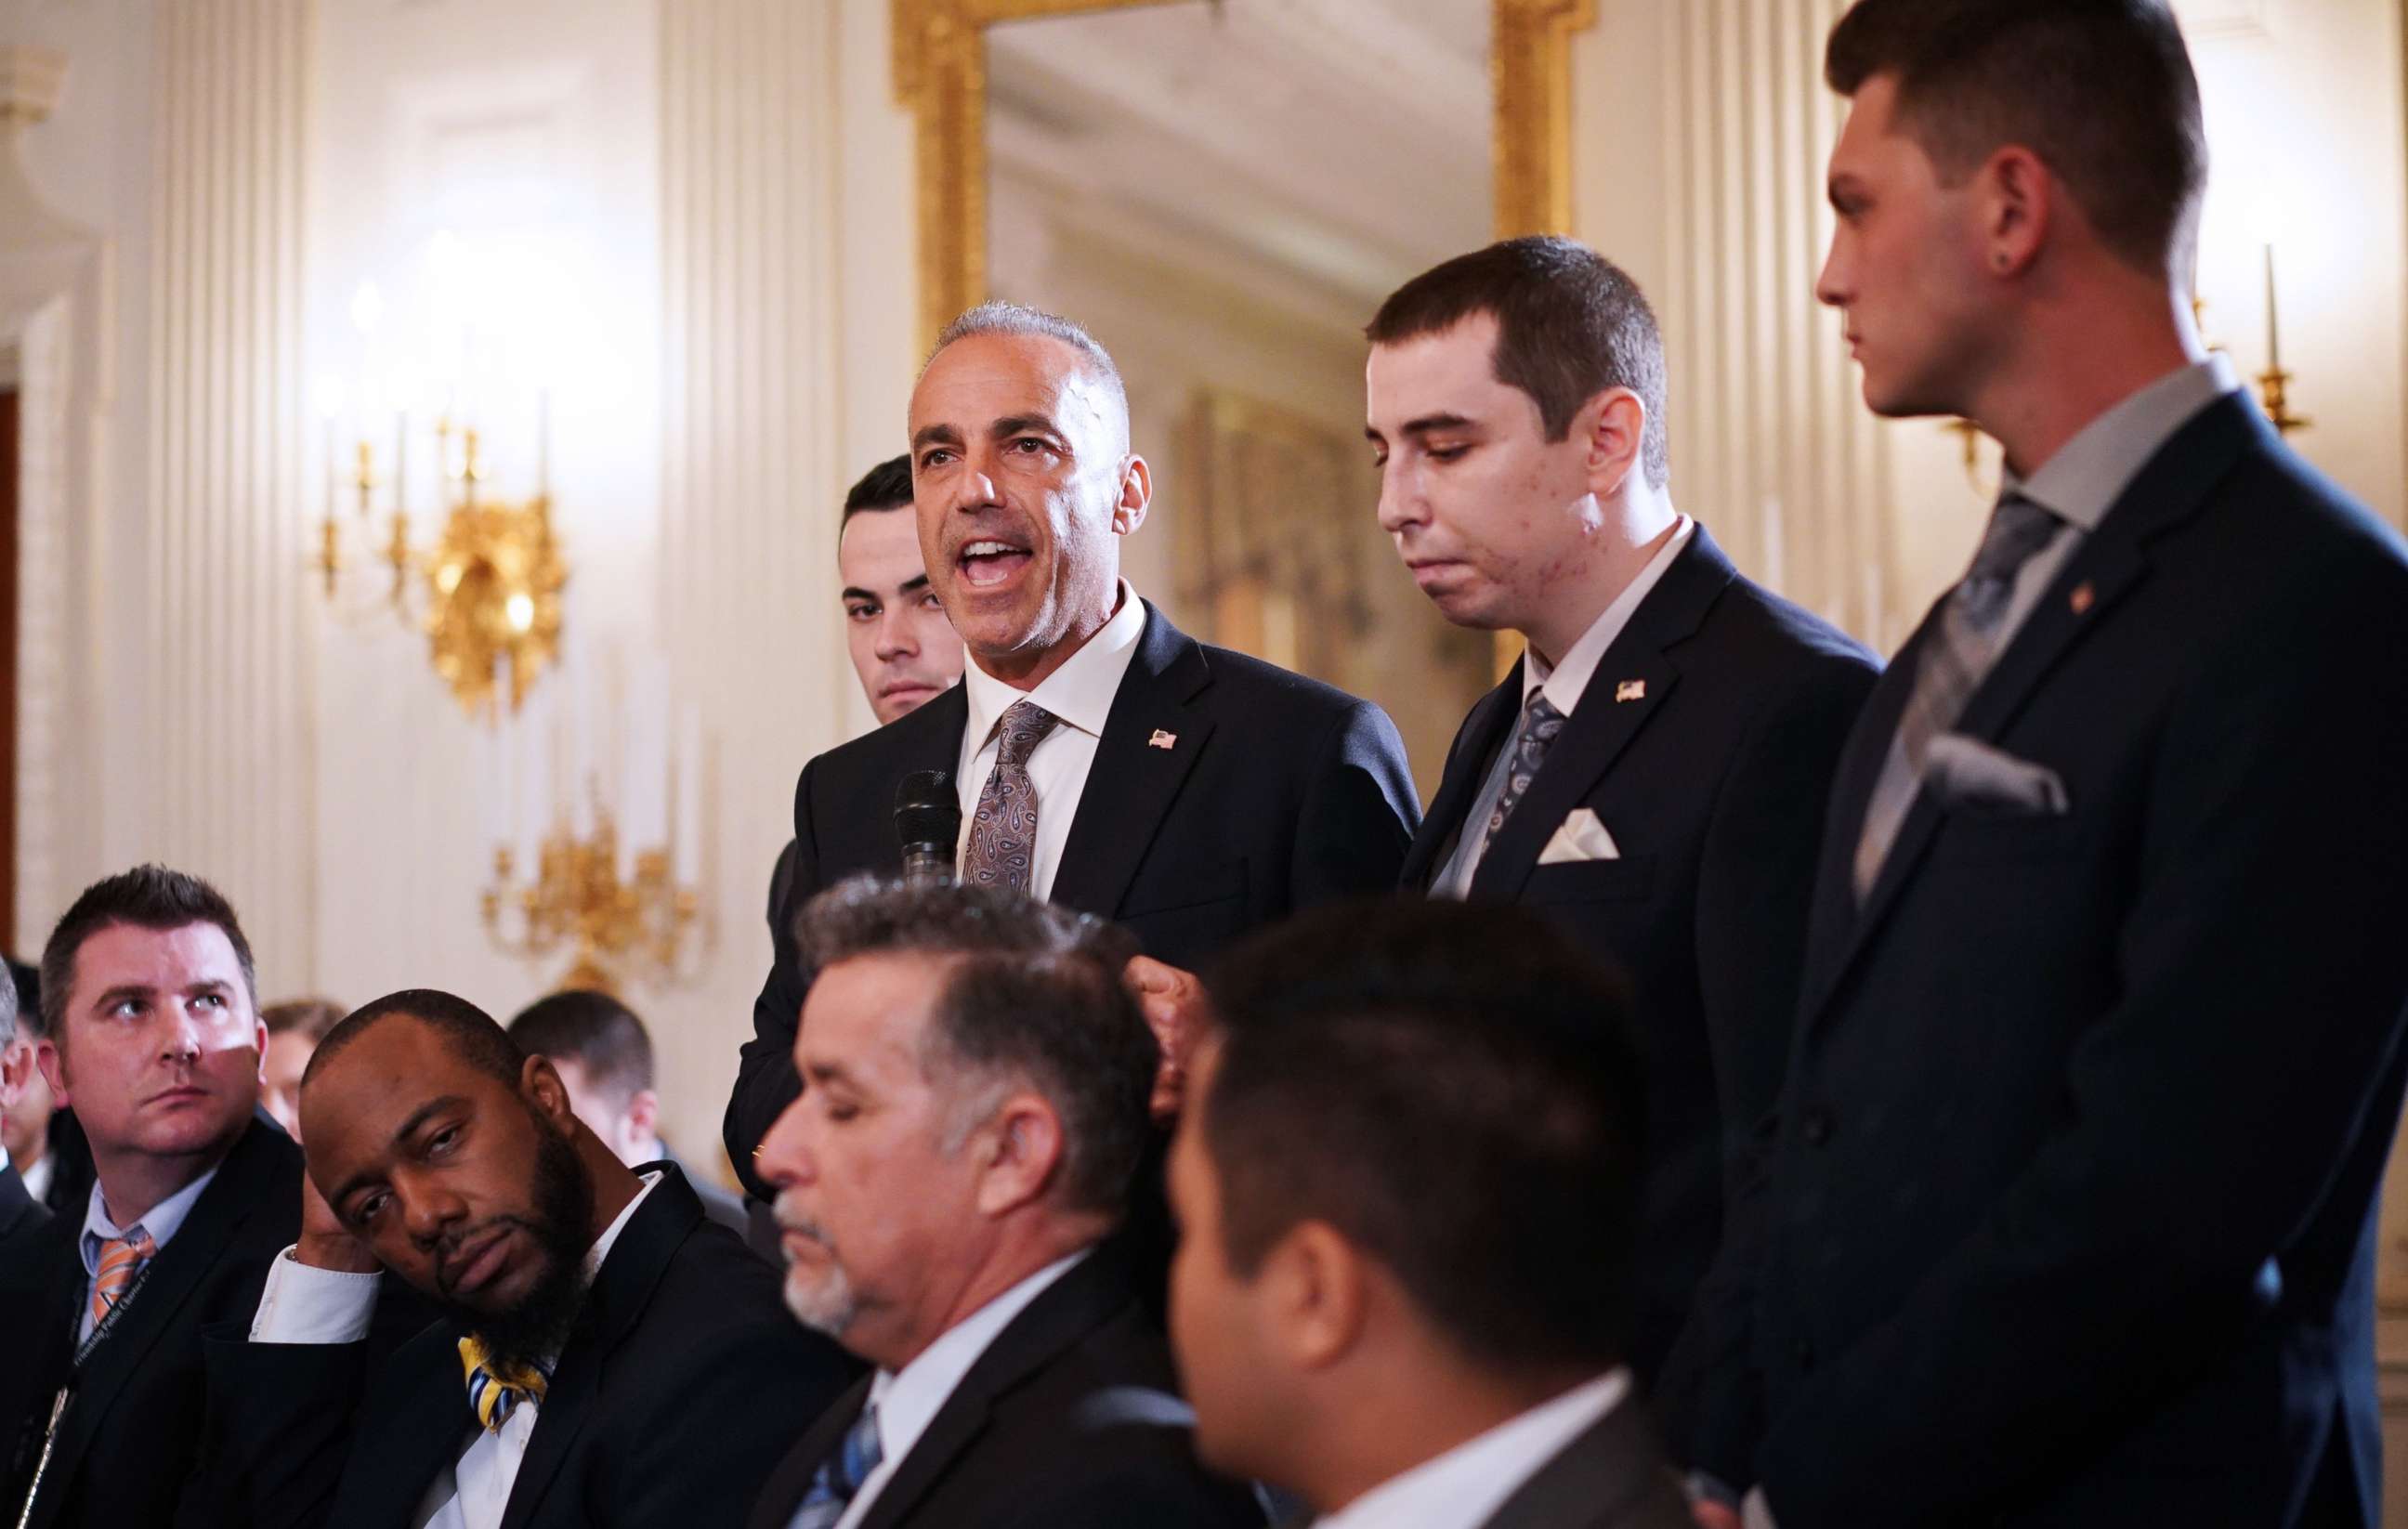 PHOTO: Andrew Pollack, whose daughter Meadow was killed in the Parkland school shooting, speaks during listening session on gun violence with President Donald Trump, teachers and students in the State Dining Room of the White House on Feb. 21, 2018. 